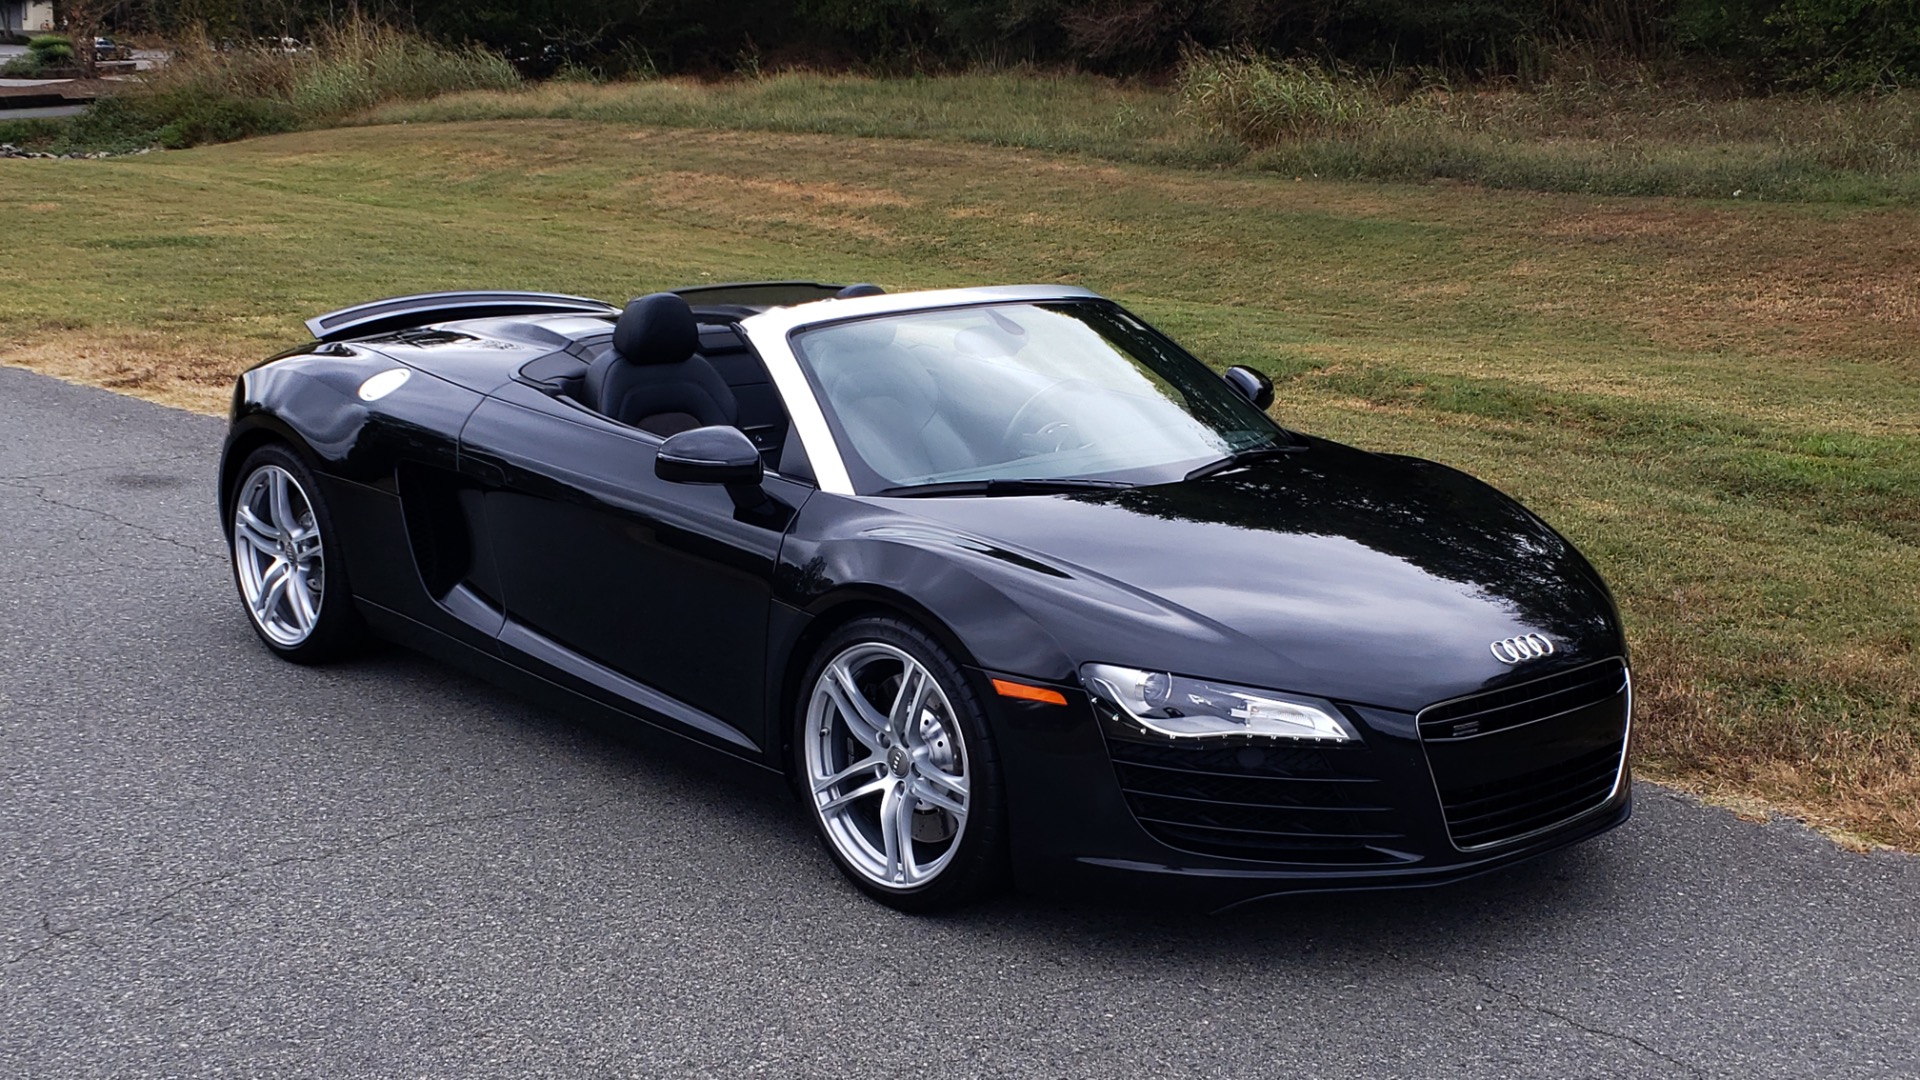 Used 2011 Audi R8 4.2L SPYDER QUATTRO / NAV / 19 IN WHEELS / LOW MILES for sale Sold at Formula Imports in Charlotte NC 28227 21